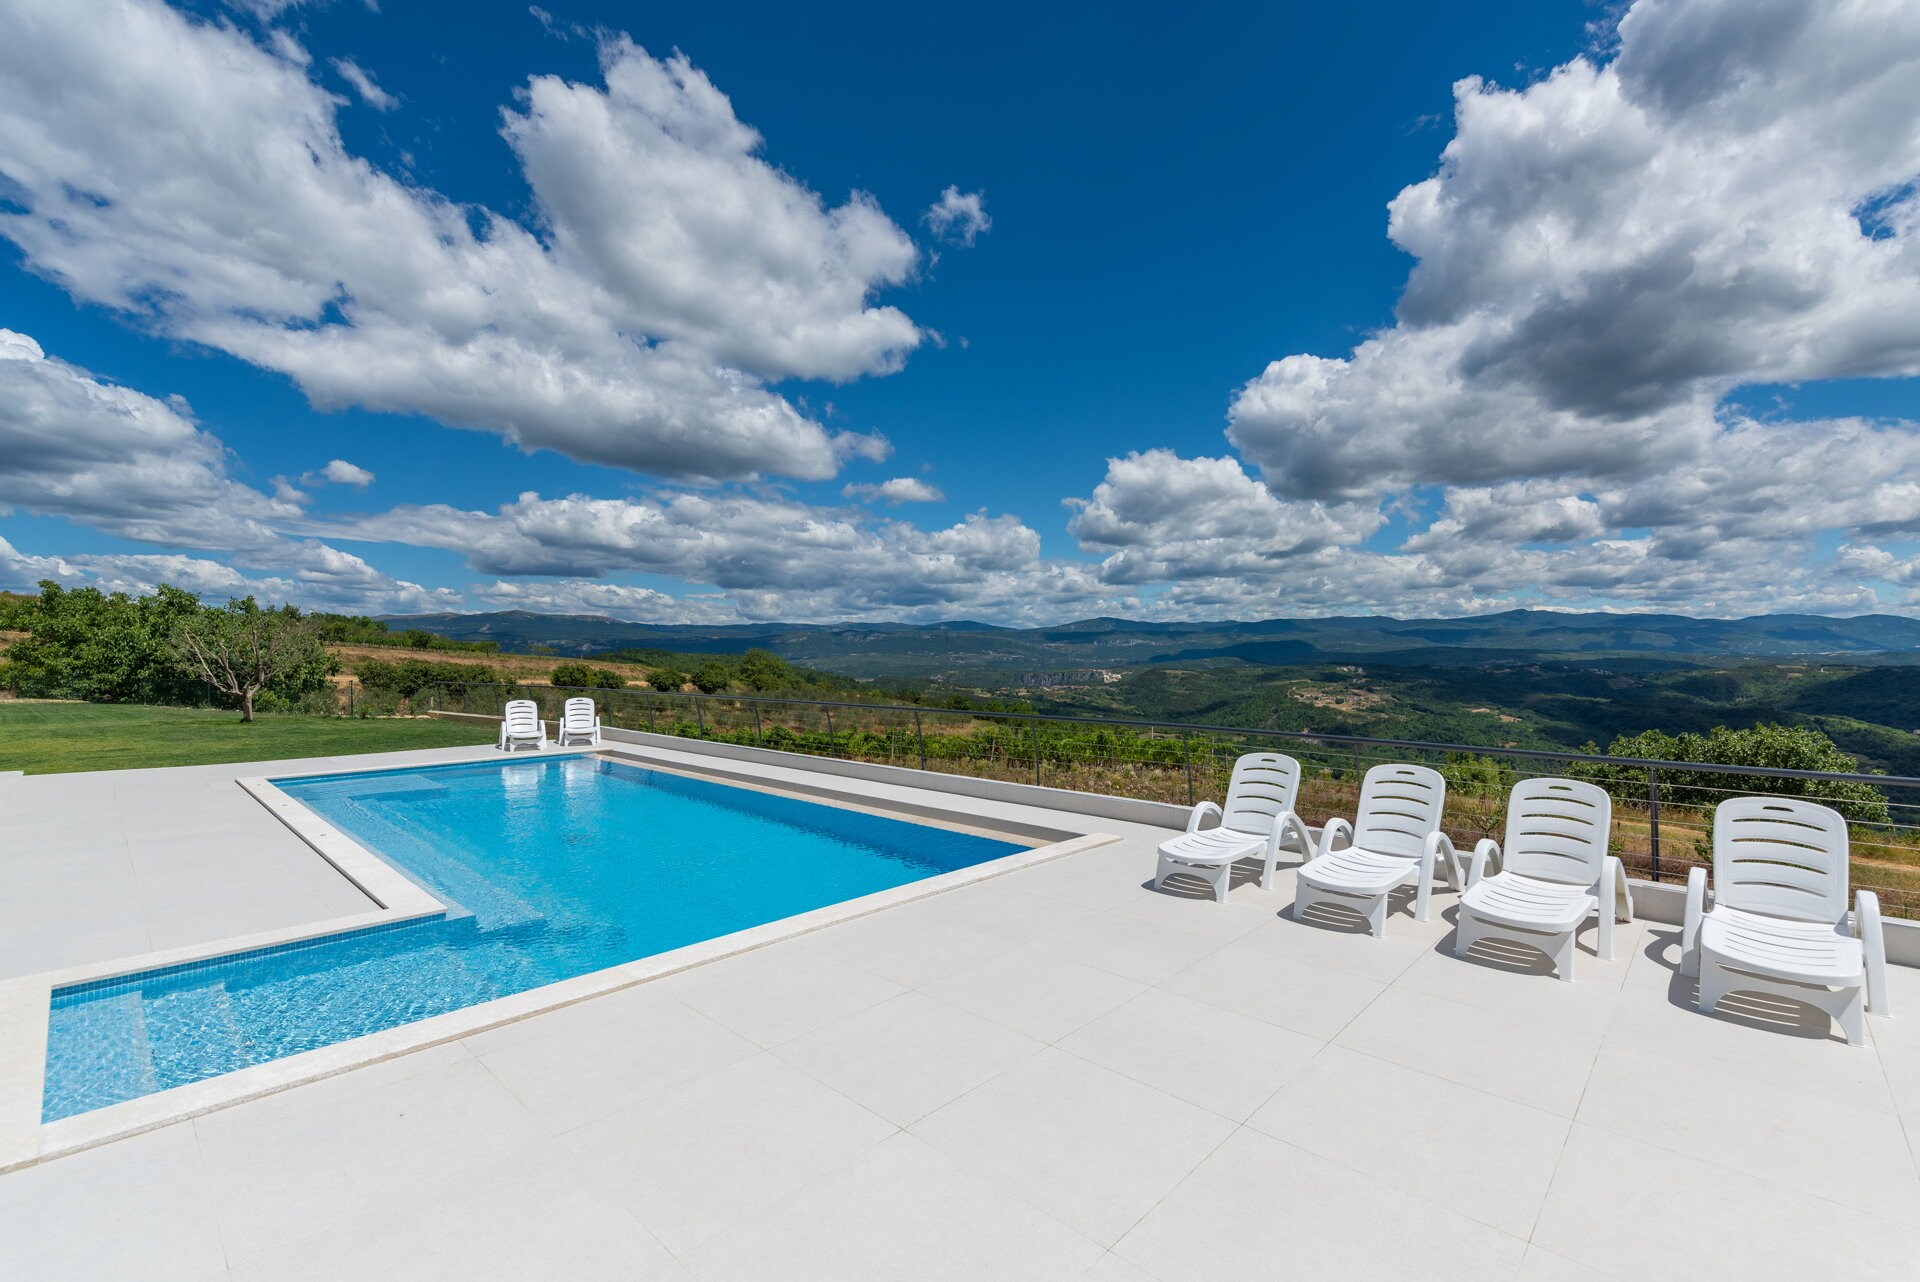 Property Image 2 - Villa Walk in the Clouds with Pool